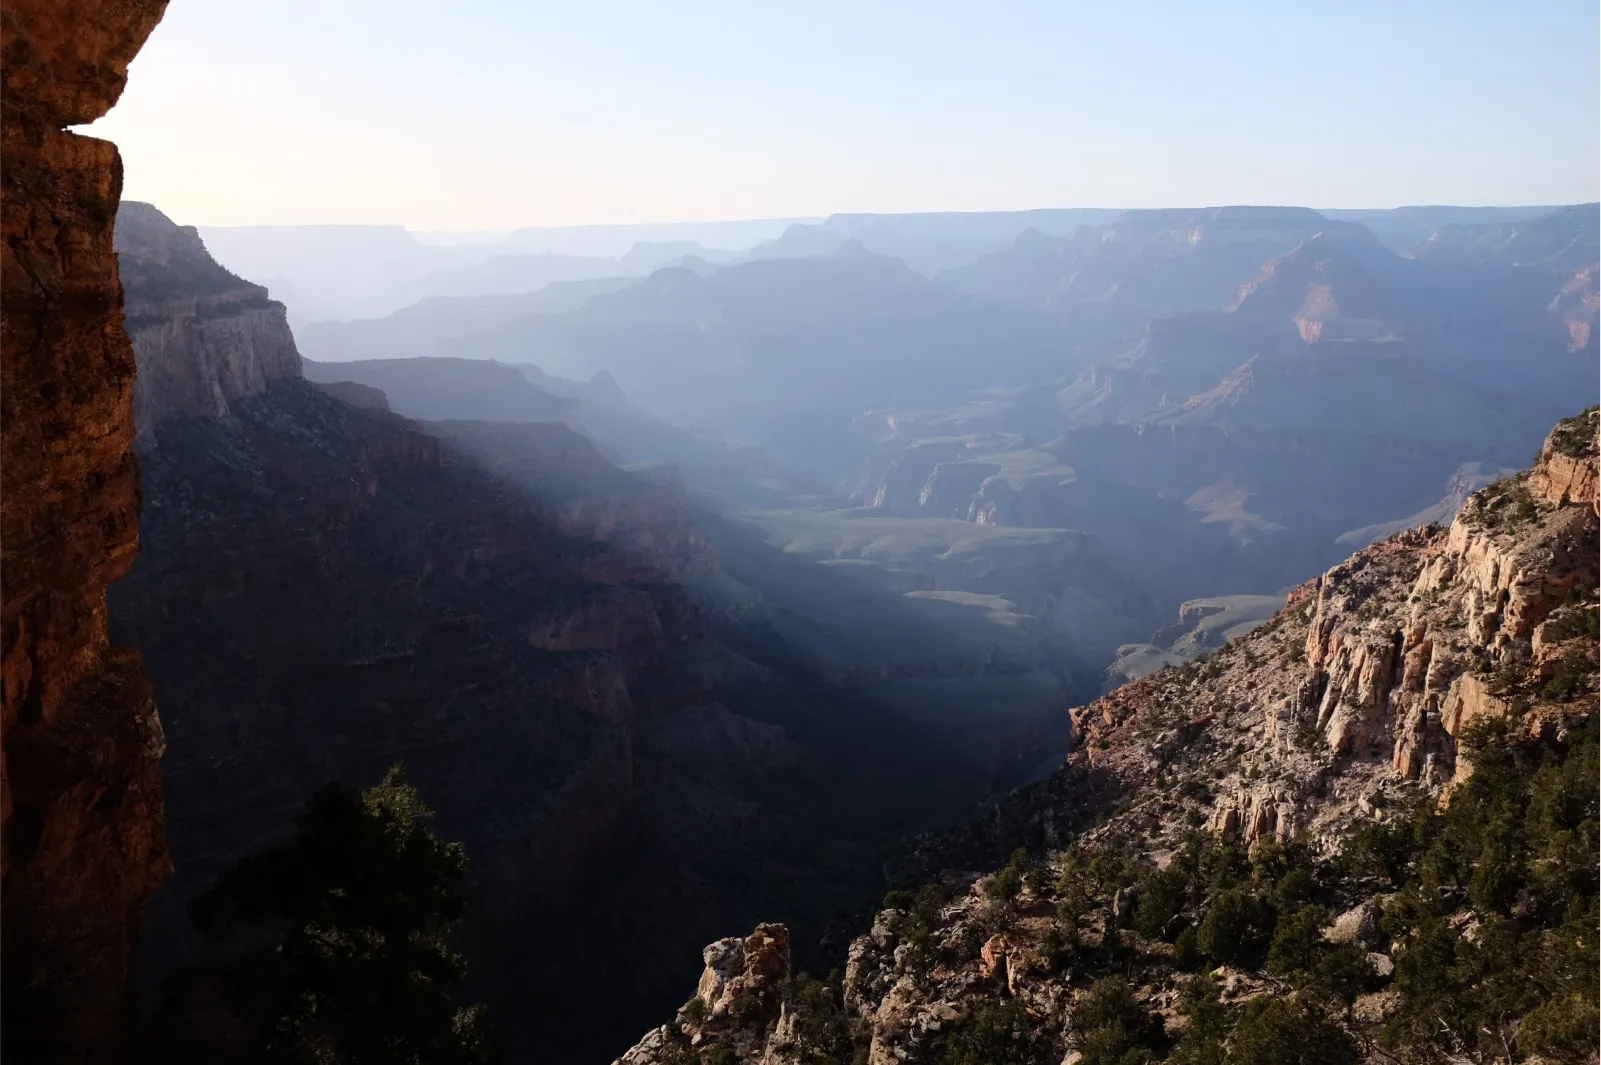 A photo taken from along the ridgeline of the Grand Canyon looking out across the valley through a light haze.